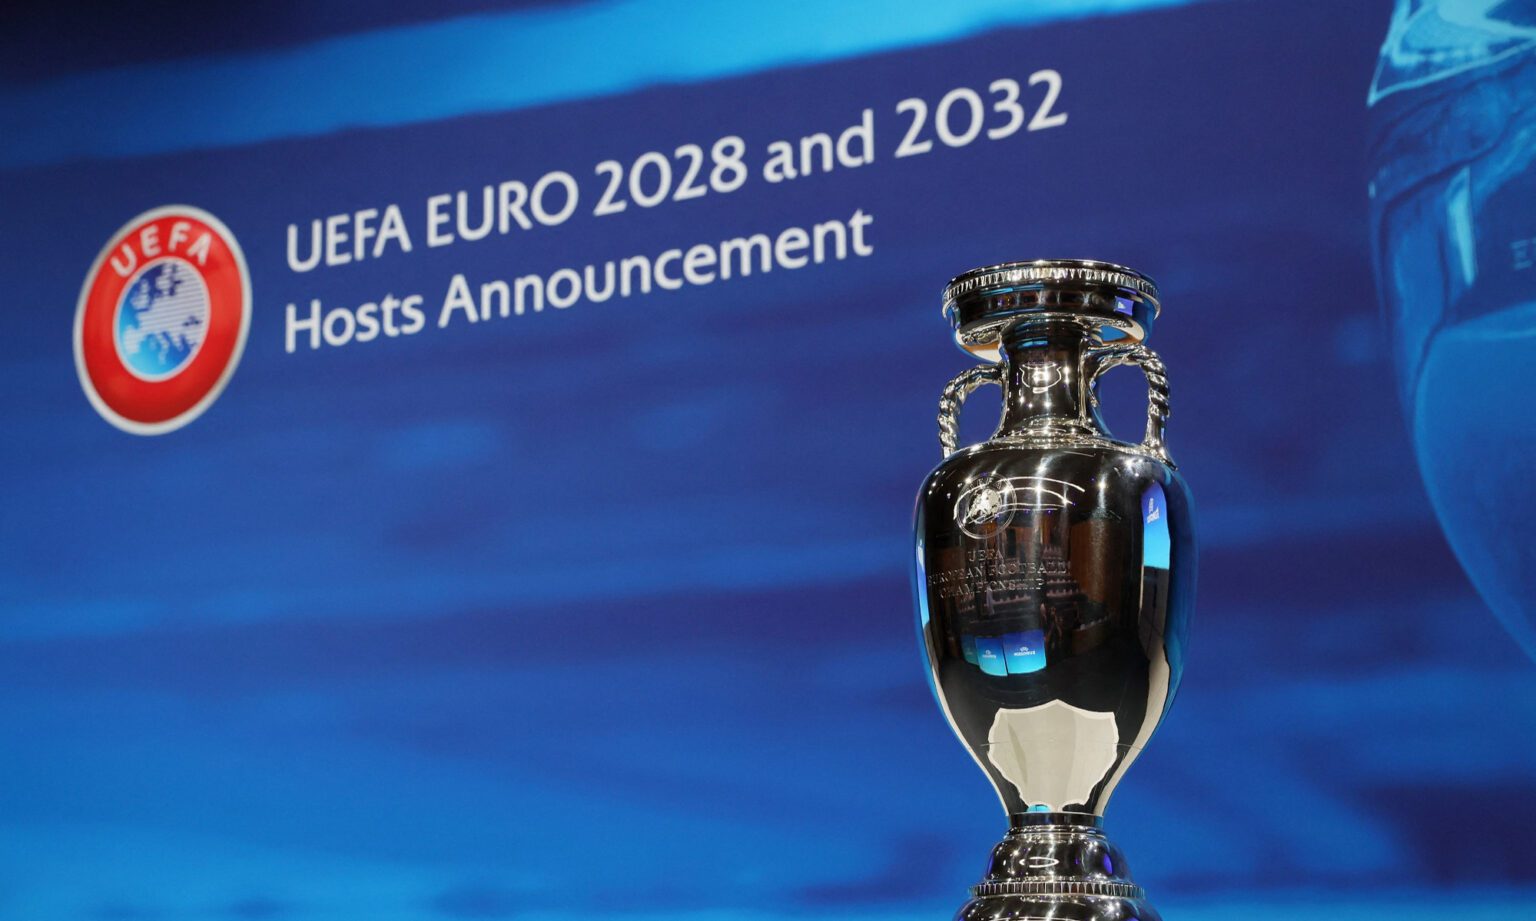 UEFA Euro 2028: 10 Proposed Stadiums to Host the Final Matches